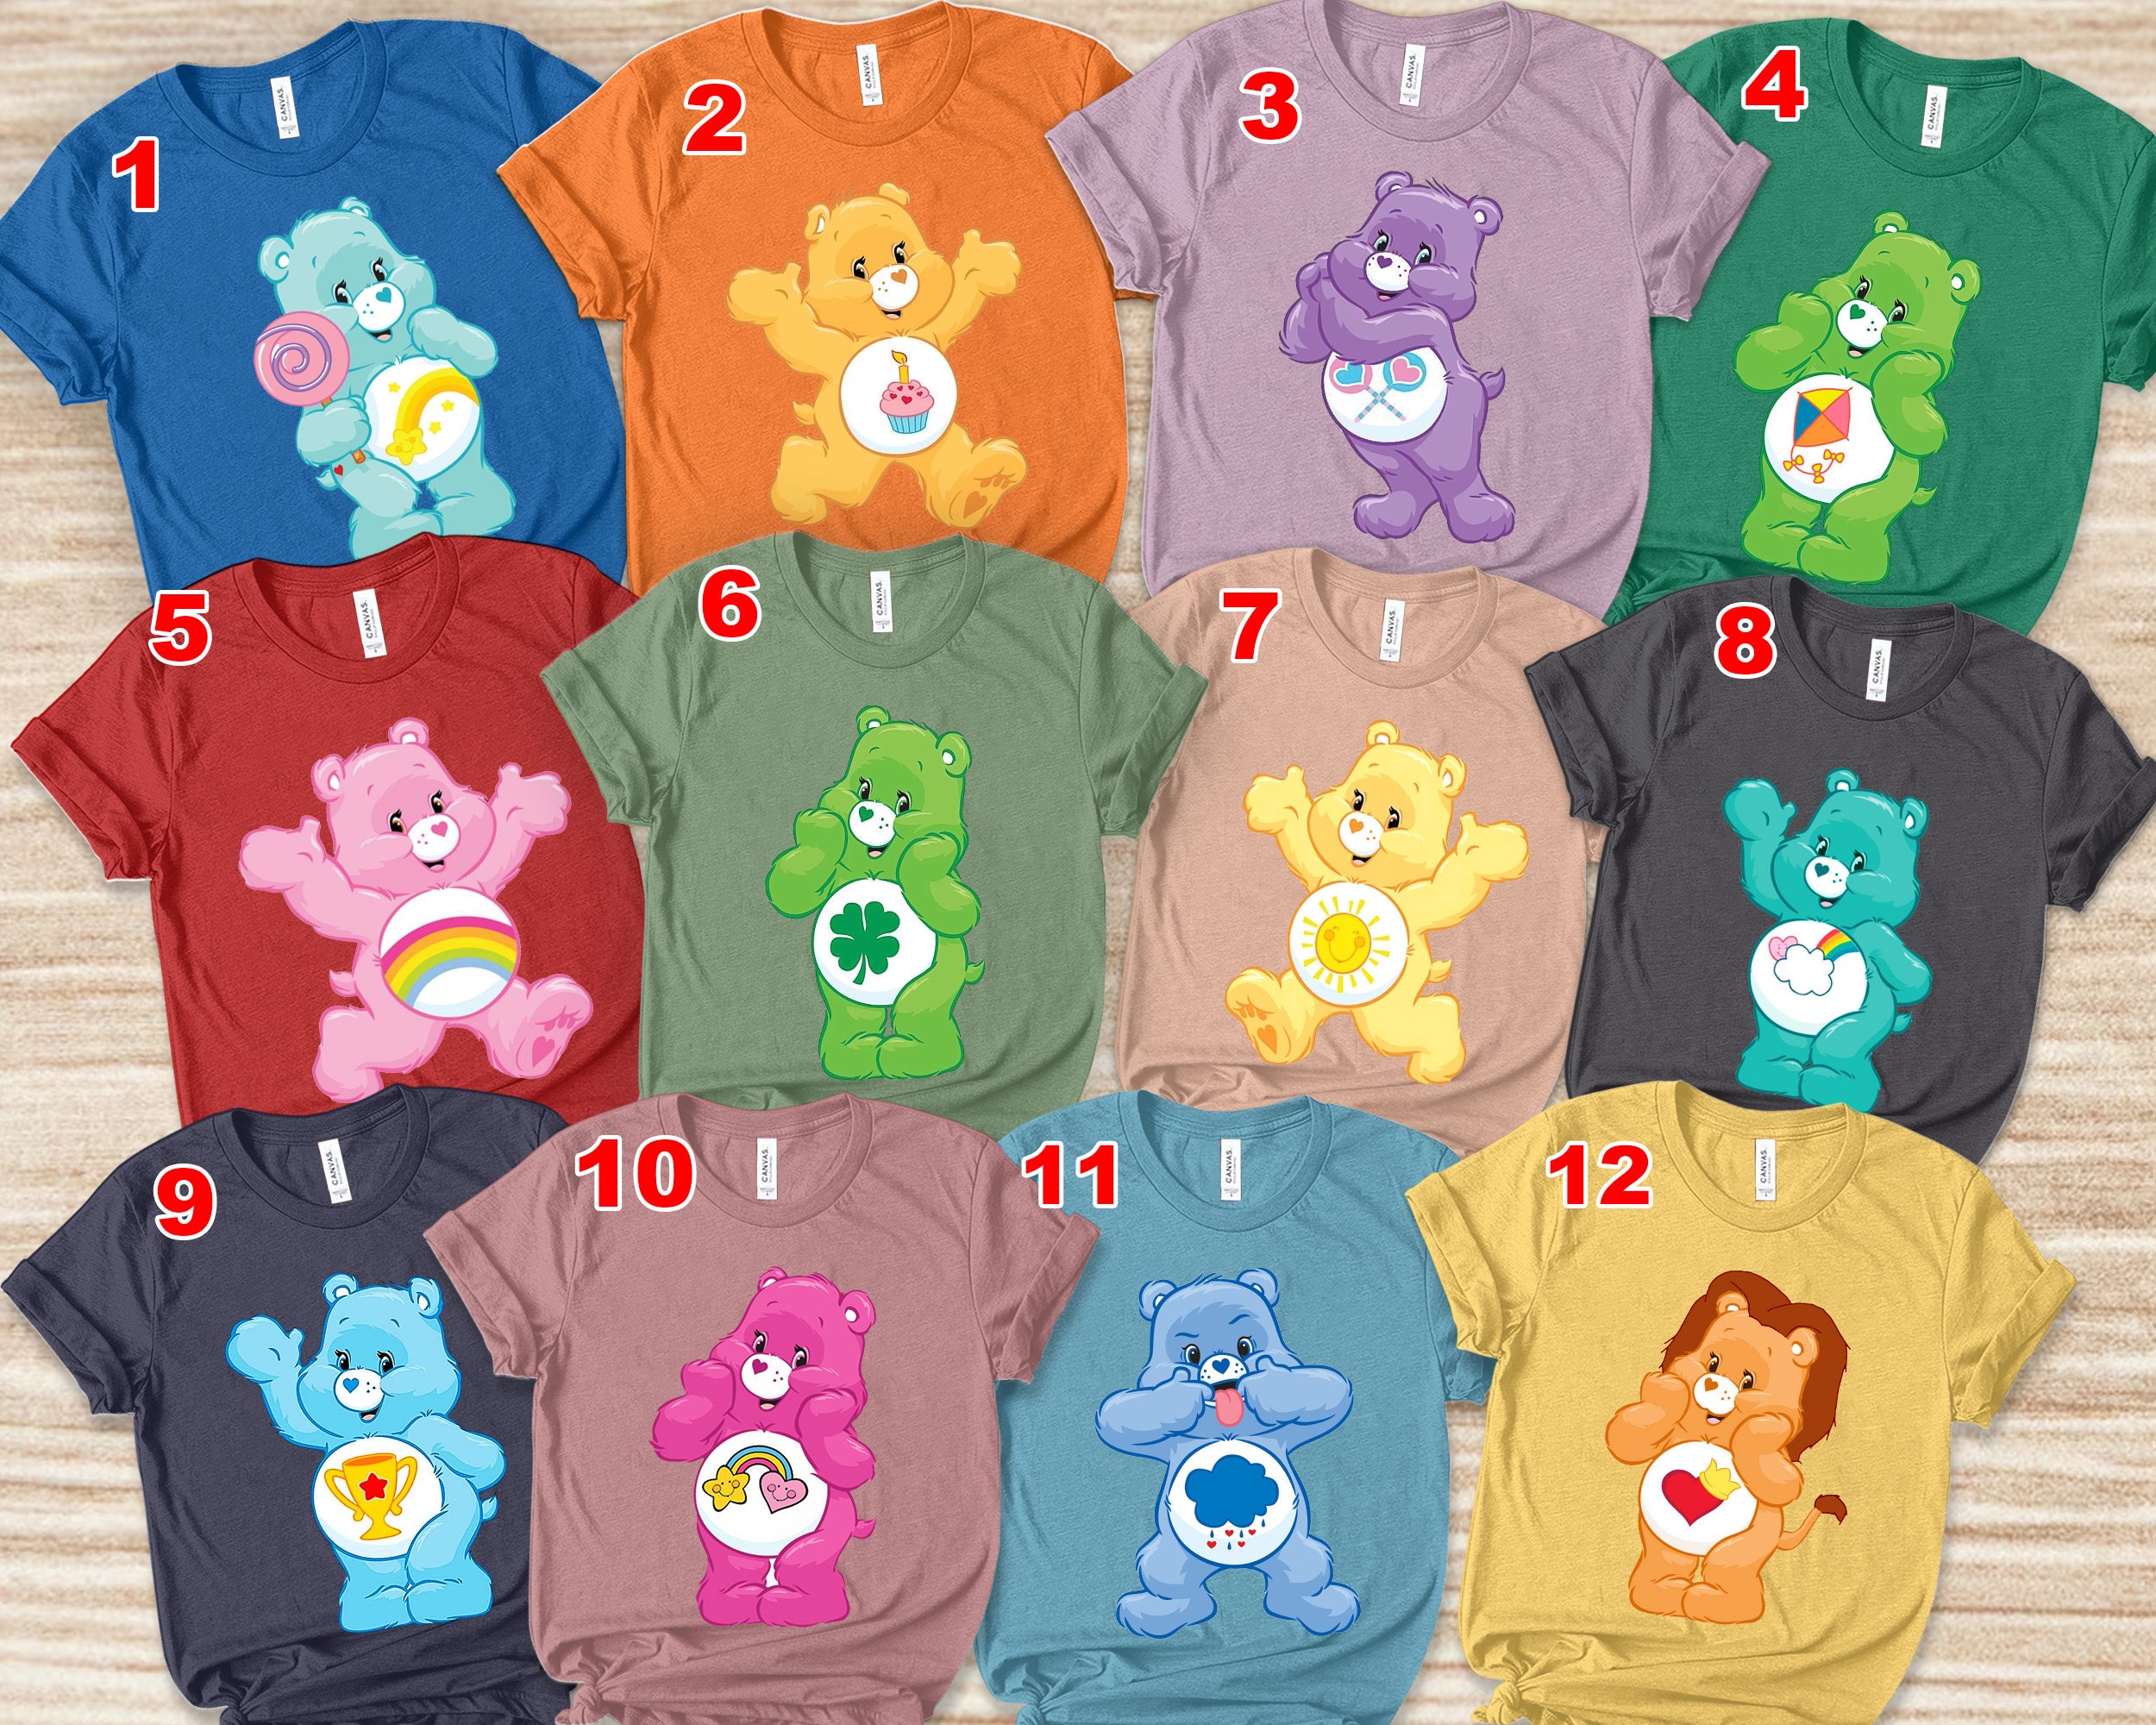 EthanCreativeGifts Care Bears Halloween Party Shirt for Care Groups, Friends, Teachers and Family, Coordinating Bear Couples,Softball Teams CYIT11